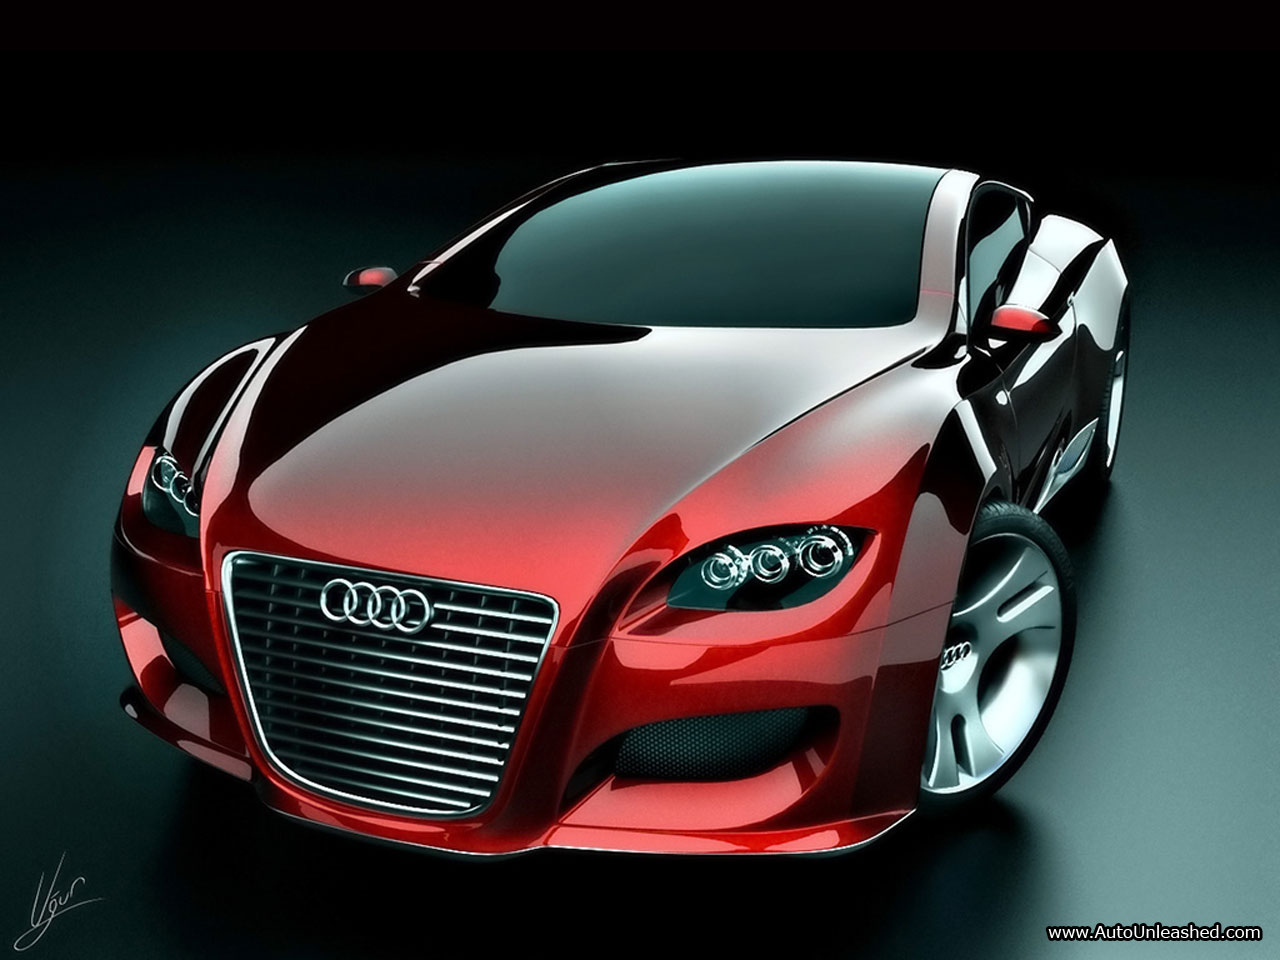 AUDI Car Picture And Wallpaper